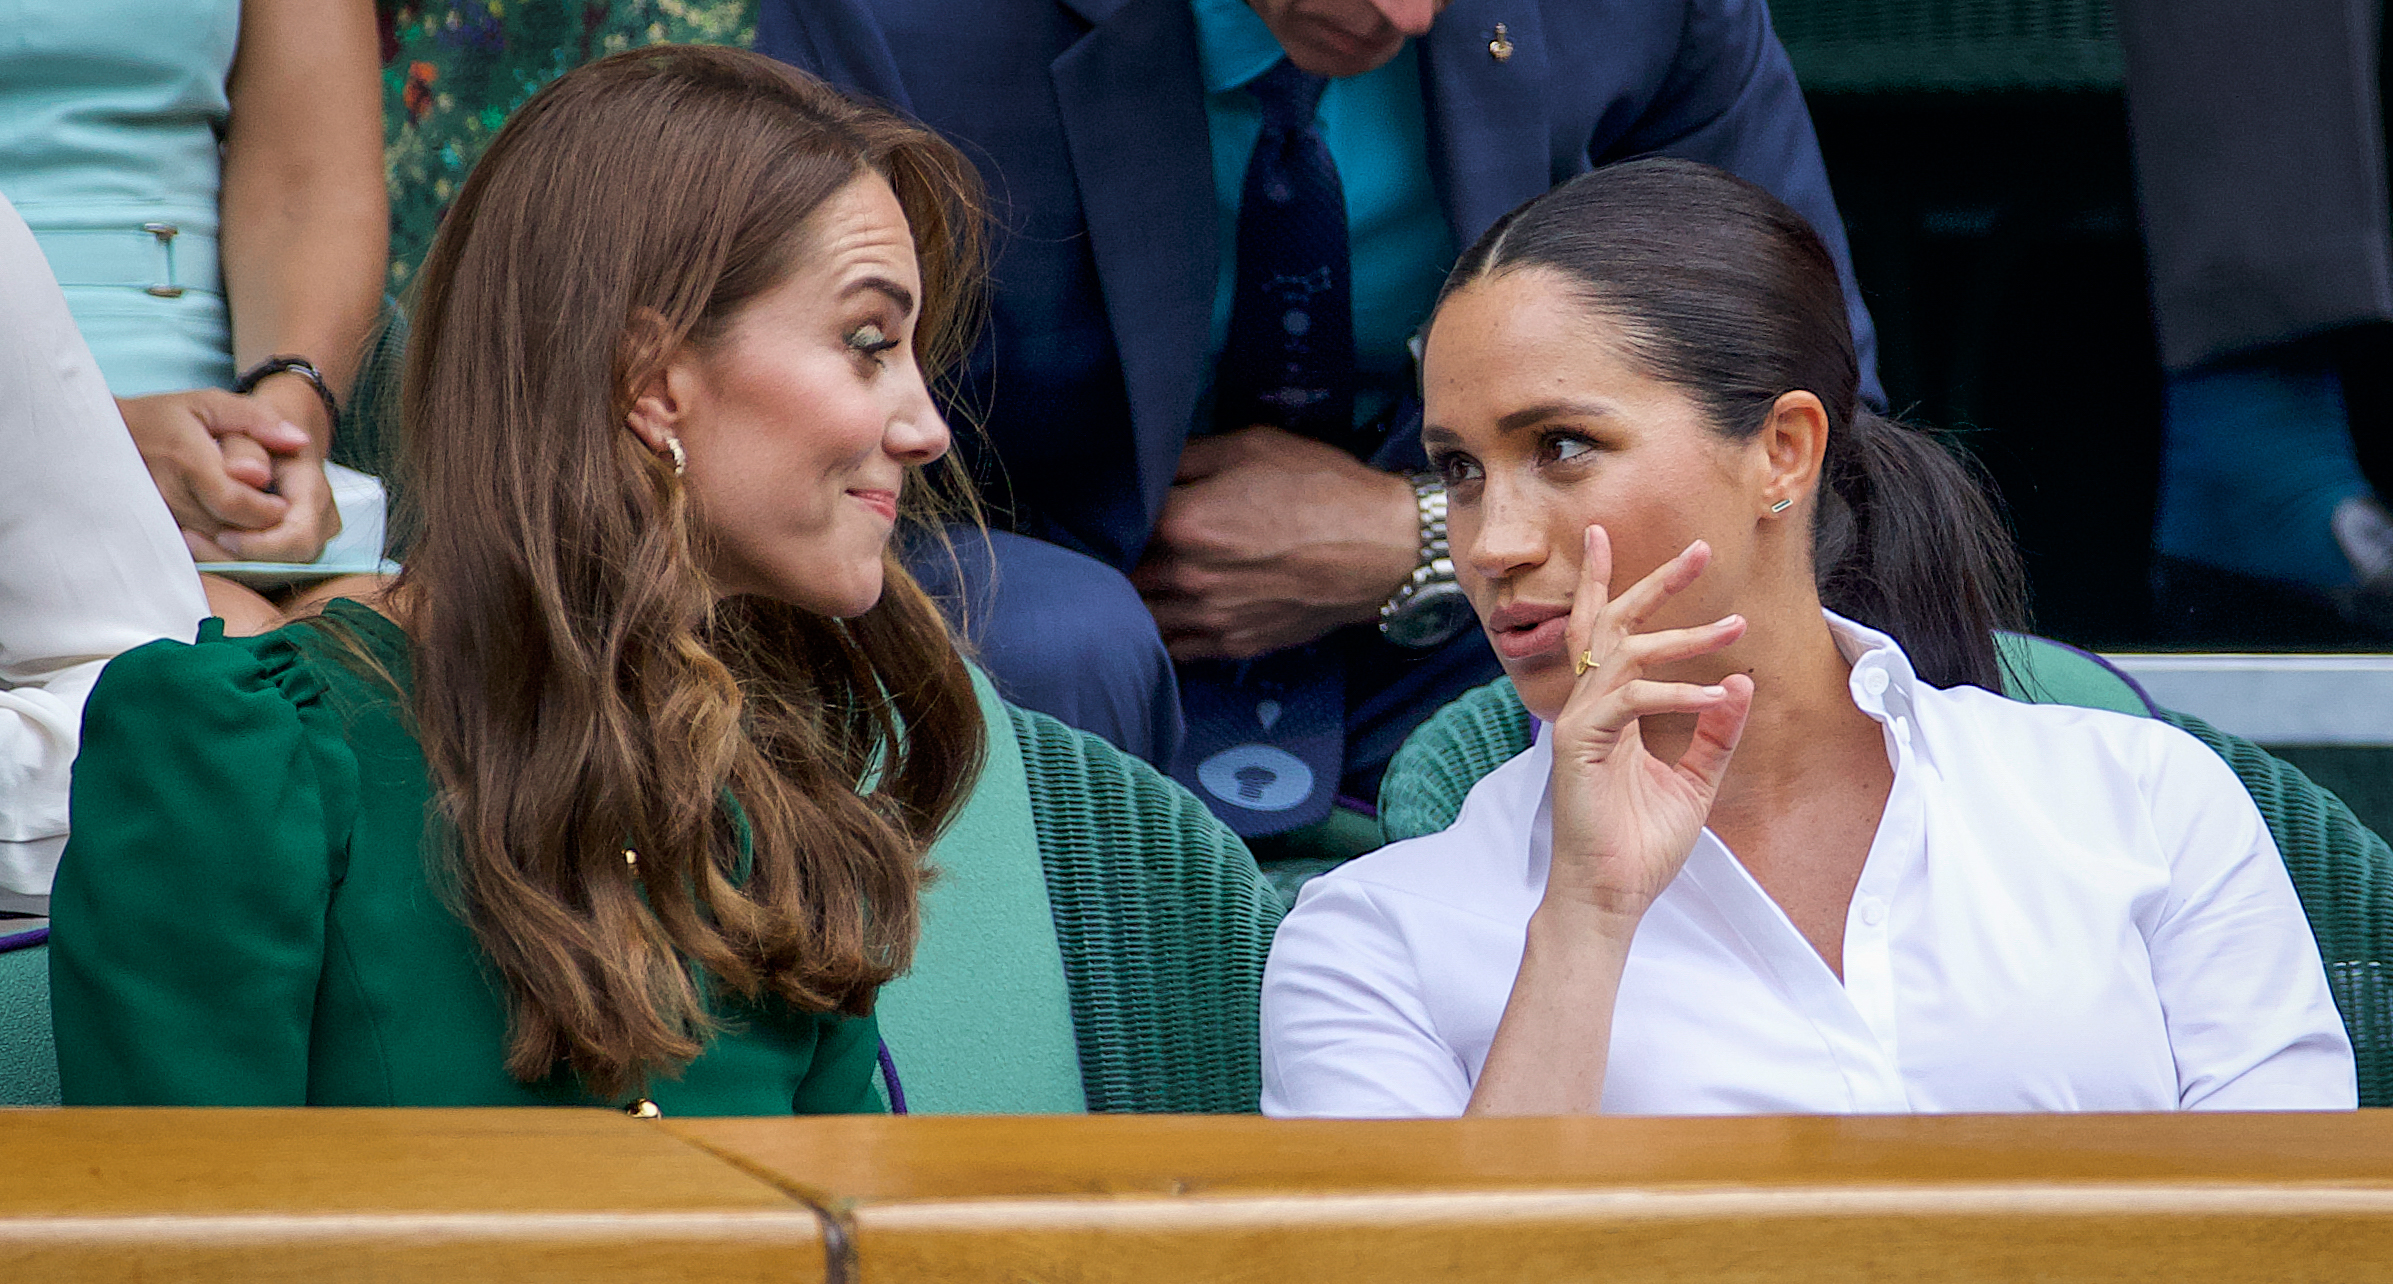 Princess Catherine and Meghan Markle at Wimbledon 2019 at All England Lawn Tennis and Croquet Club on July 13, 2019 in London, England | Source: Getty Images